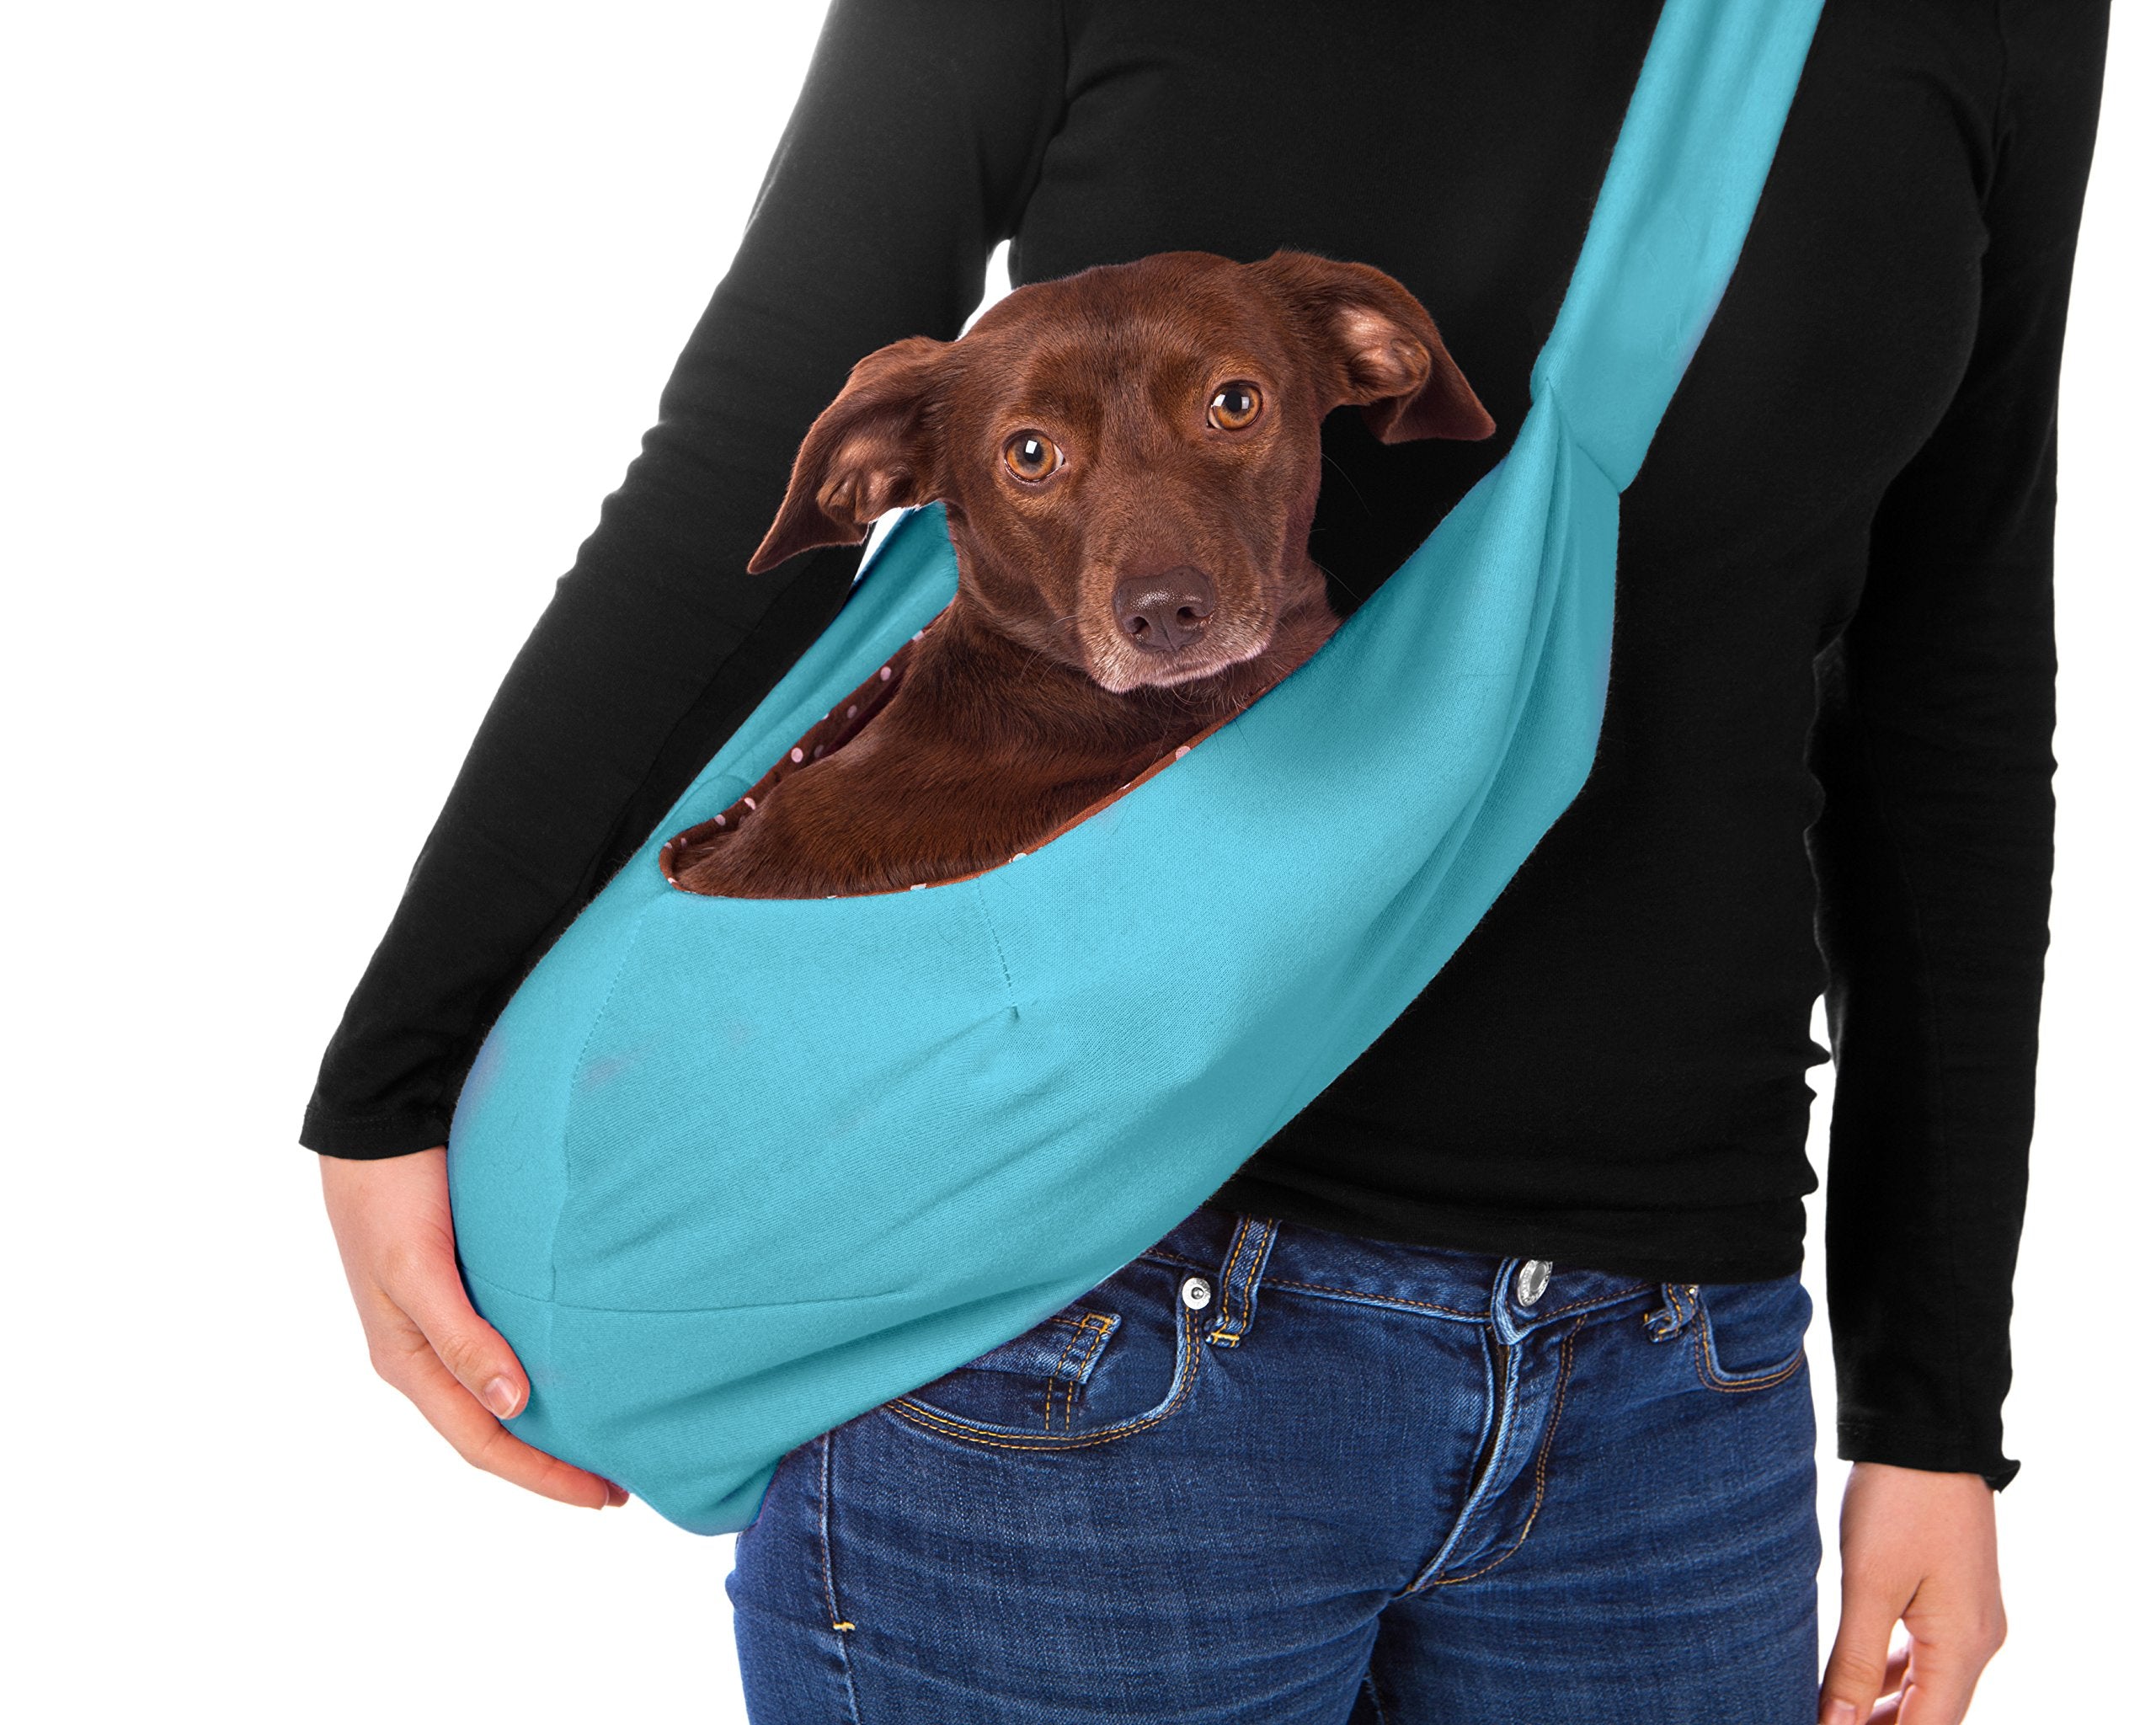 iPrimio Dog and Cat Sling Carrier – Hands Free Reversible Pet Papoose Bag - Soft Pouch and Tote Design – Suitable for Puppy, Small Dogs, and Cats for Outdoor Travel  - Like New